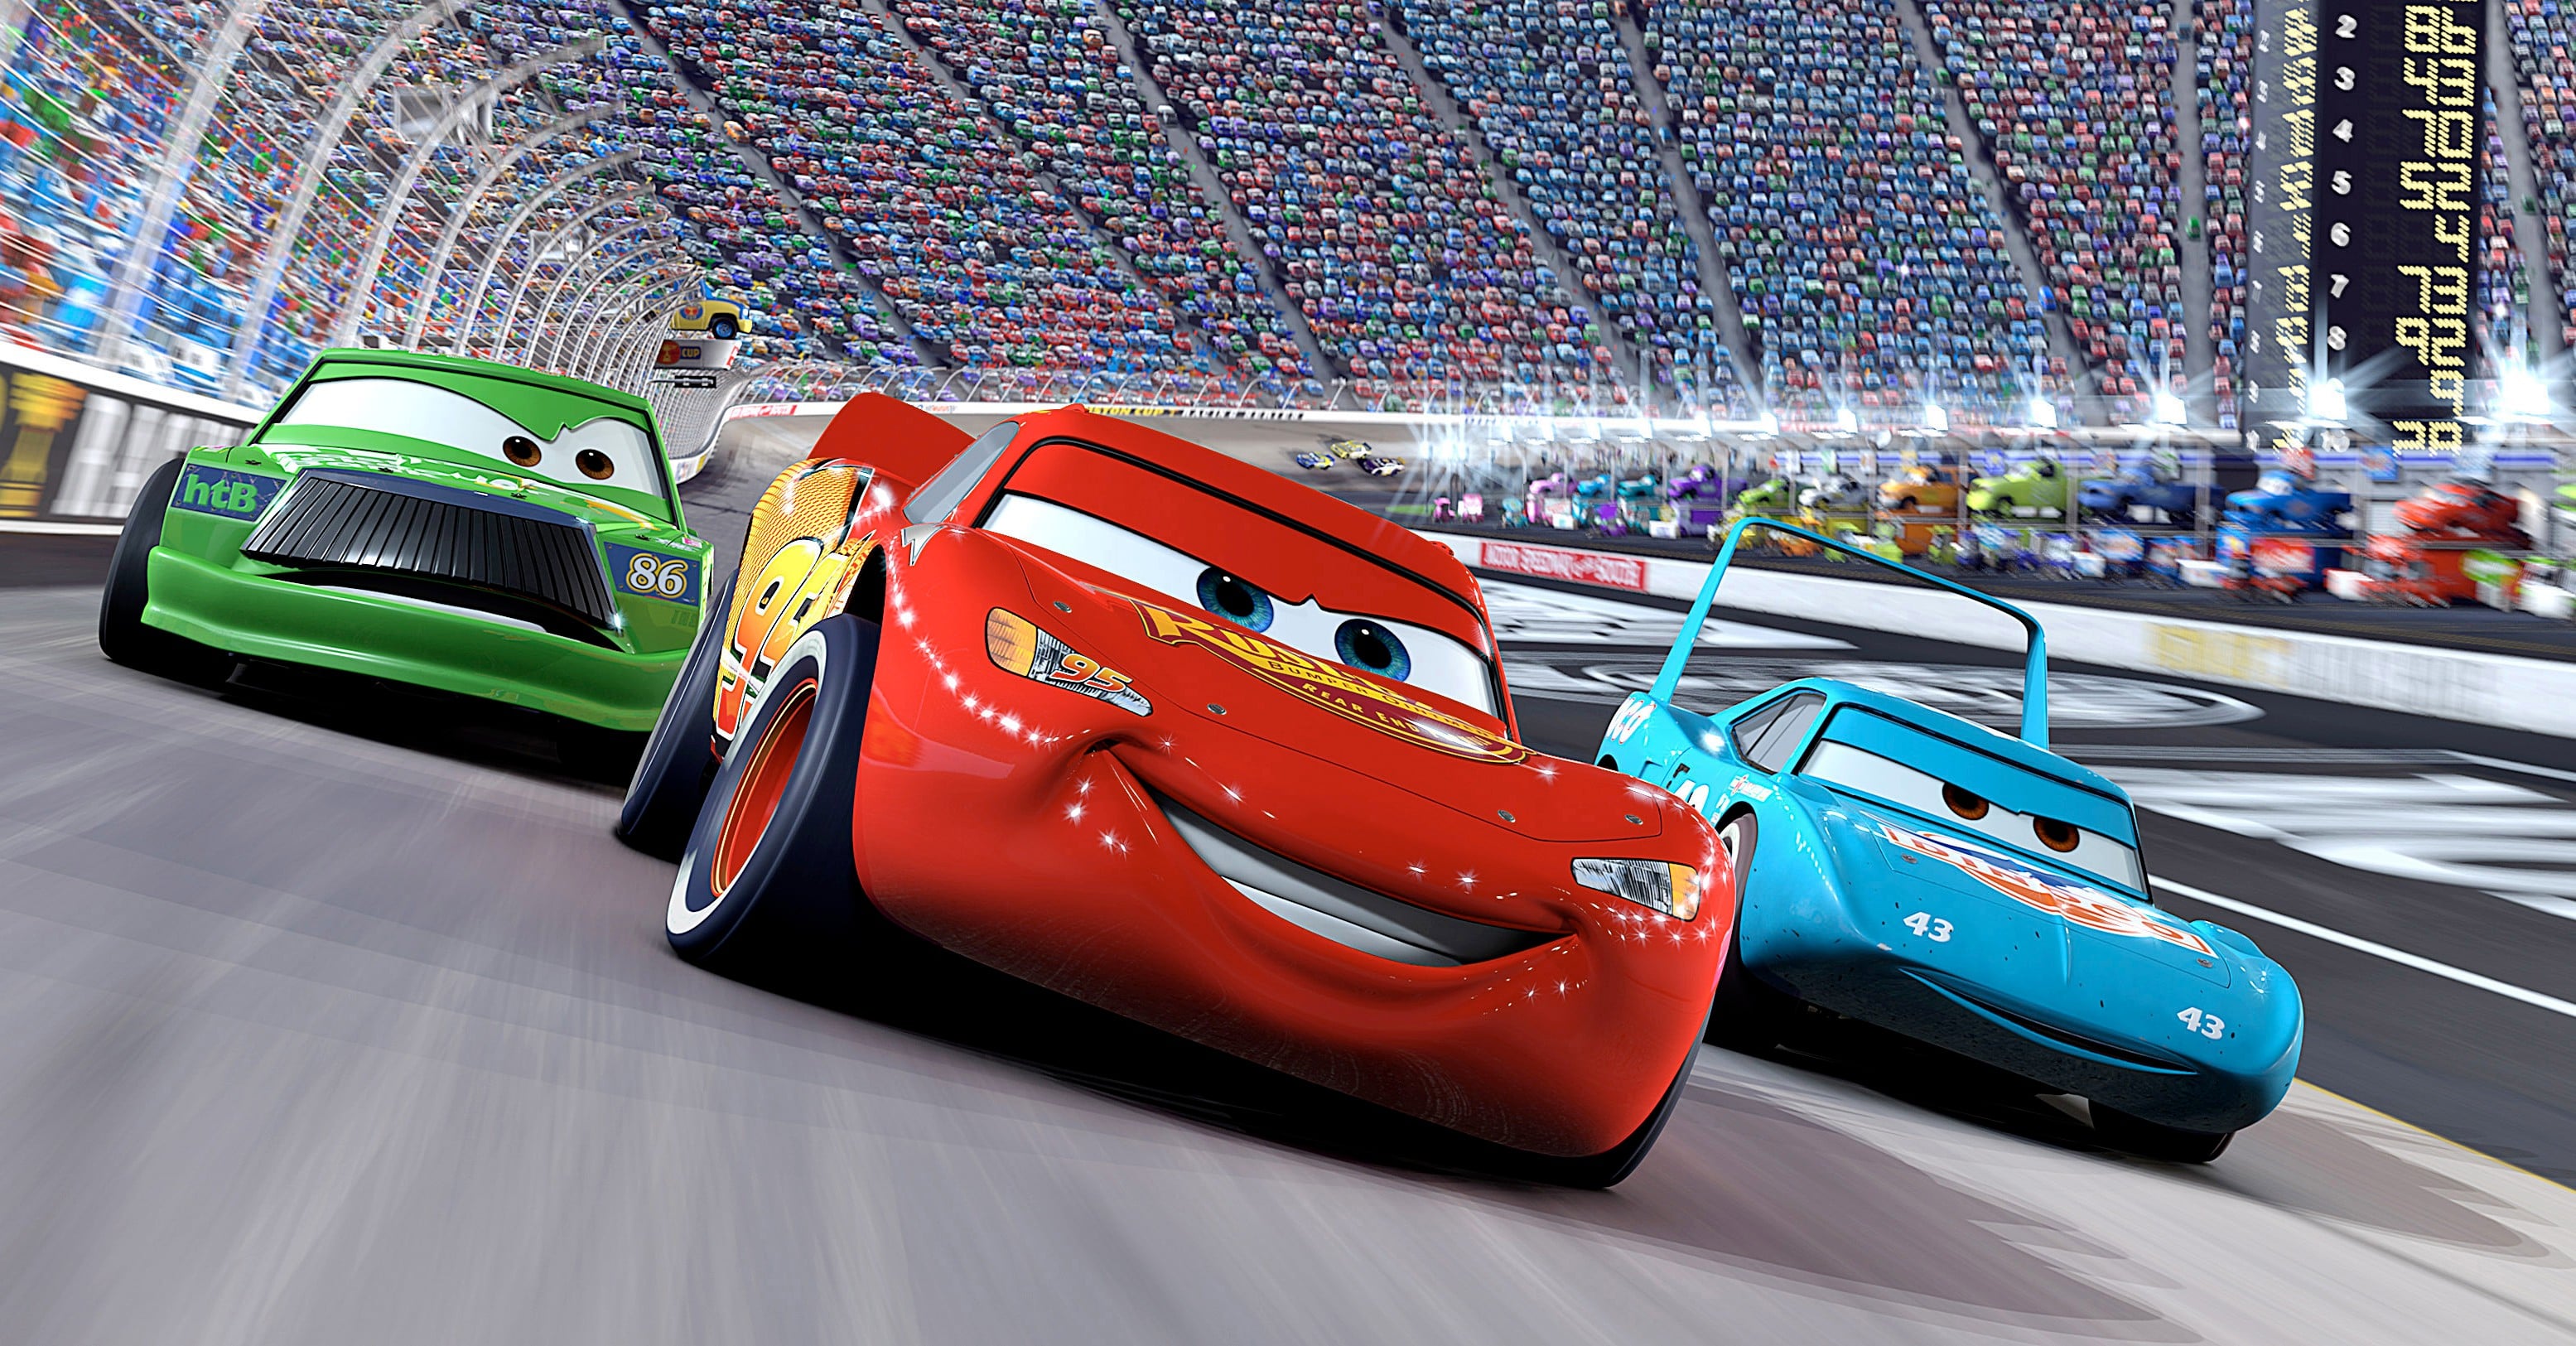 The New Lightning McQueen's Racing Academy at Disney's Hollywood